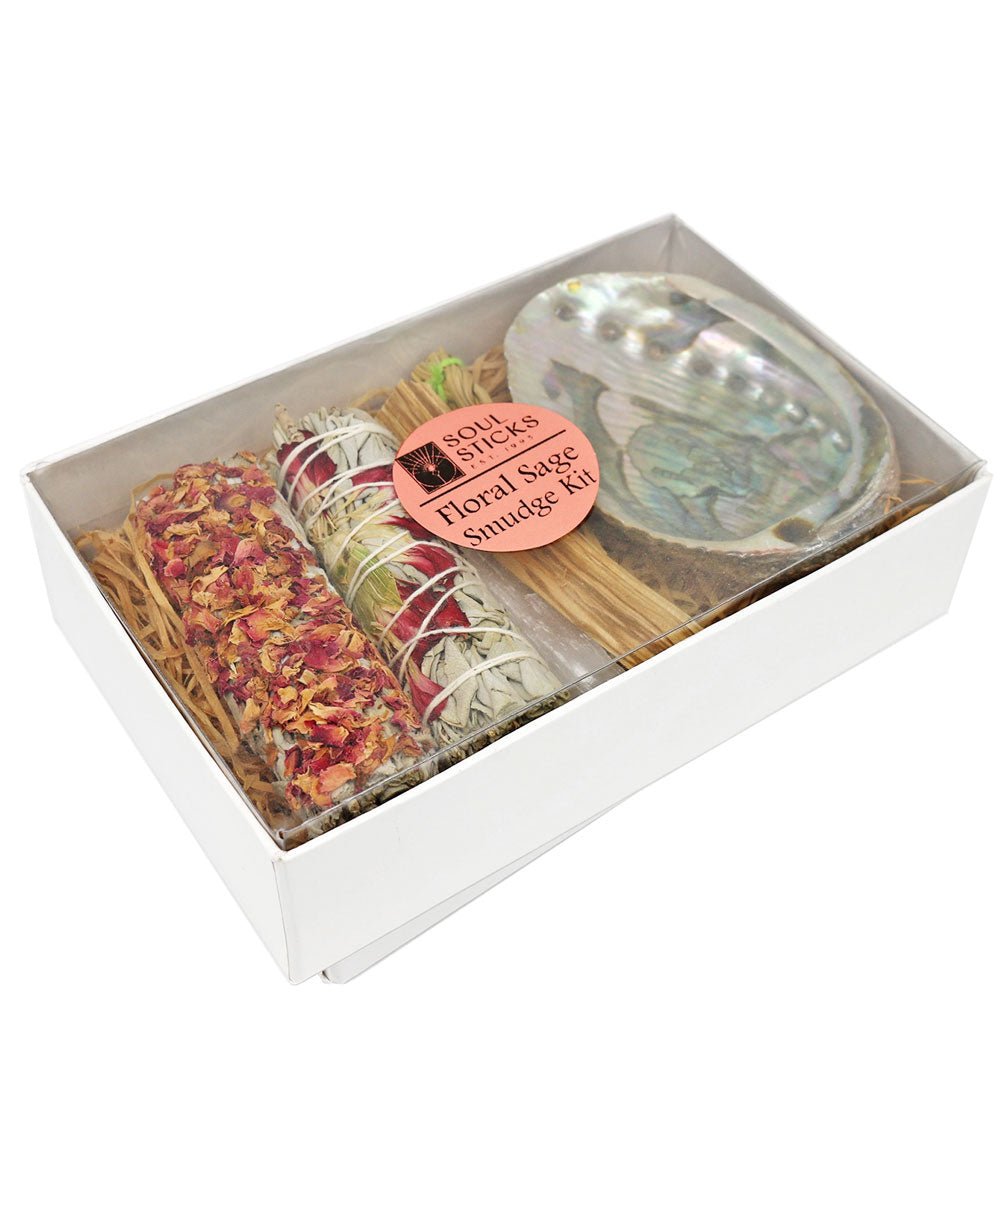 Floral Sage Smudge Kit in White Gift Box -